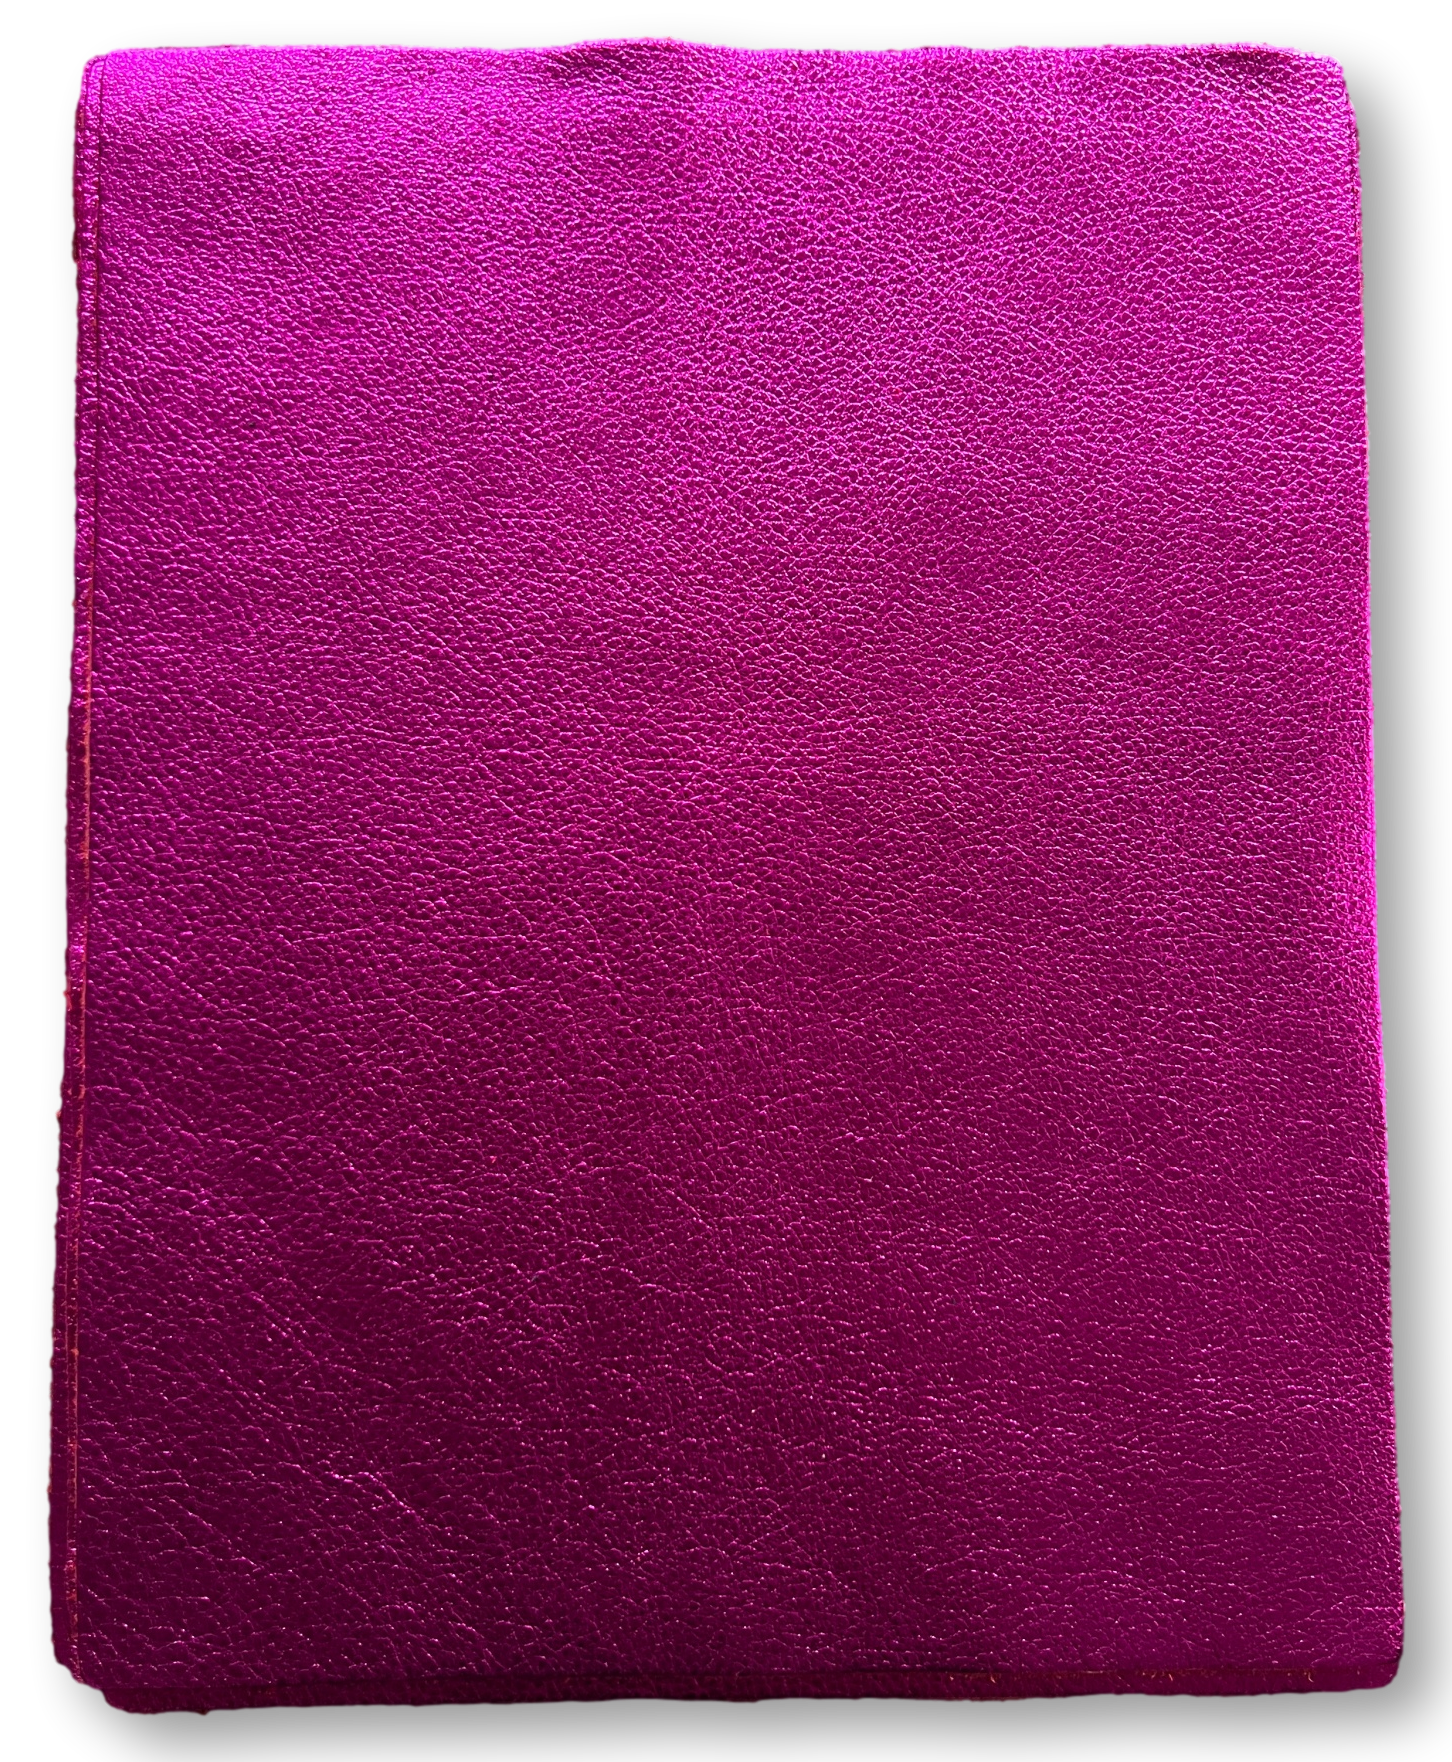 Hot Pink Metallic Cowhide Leather: 8.5'' x 11'' Pre-Cut Pieces